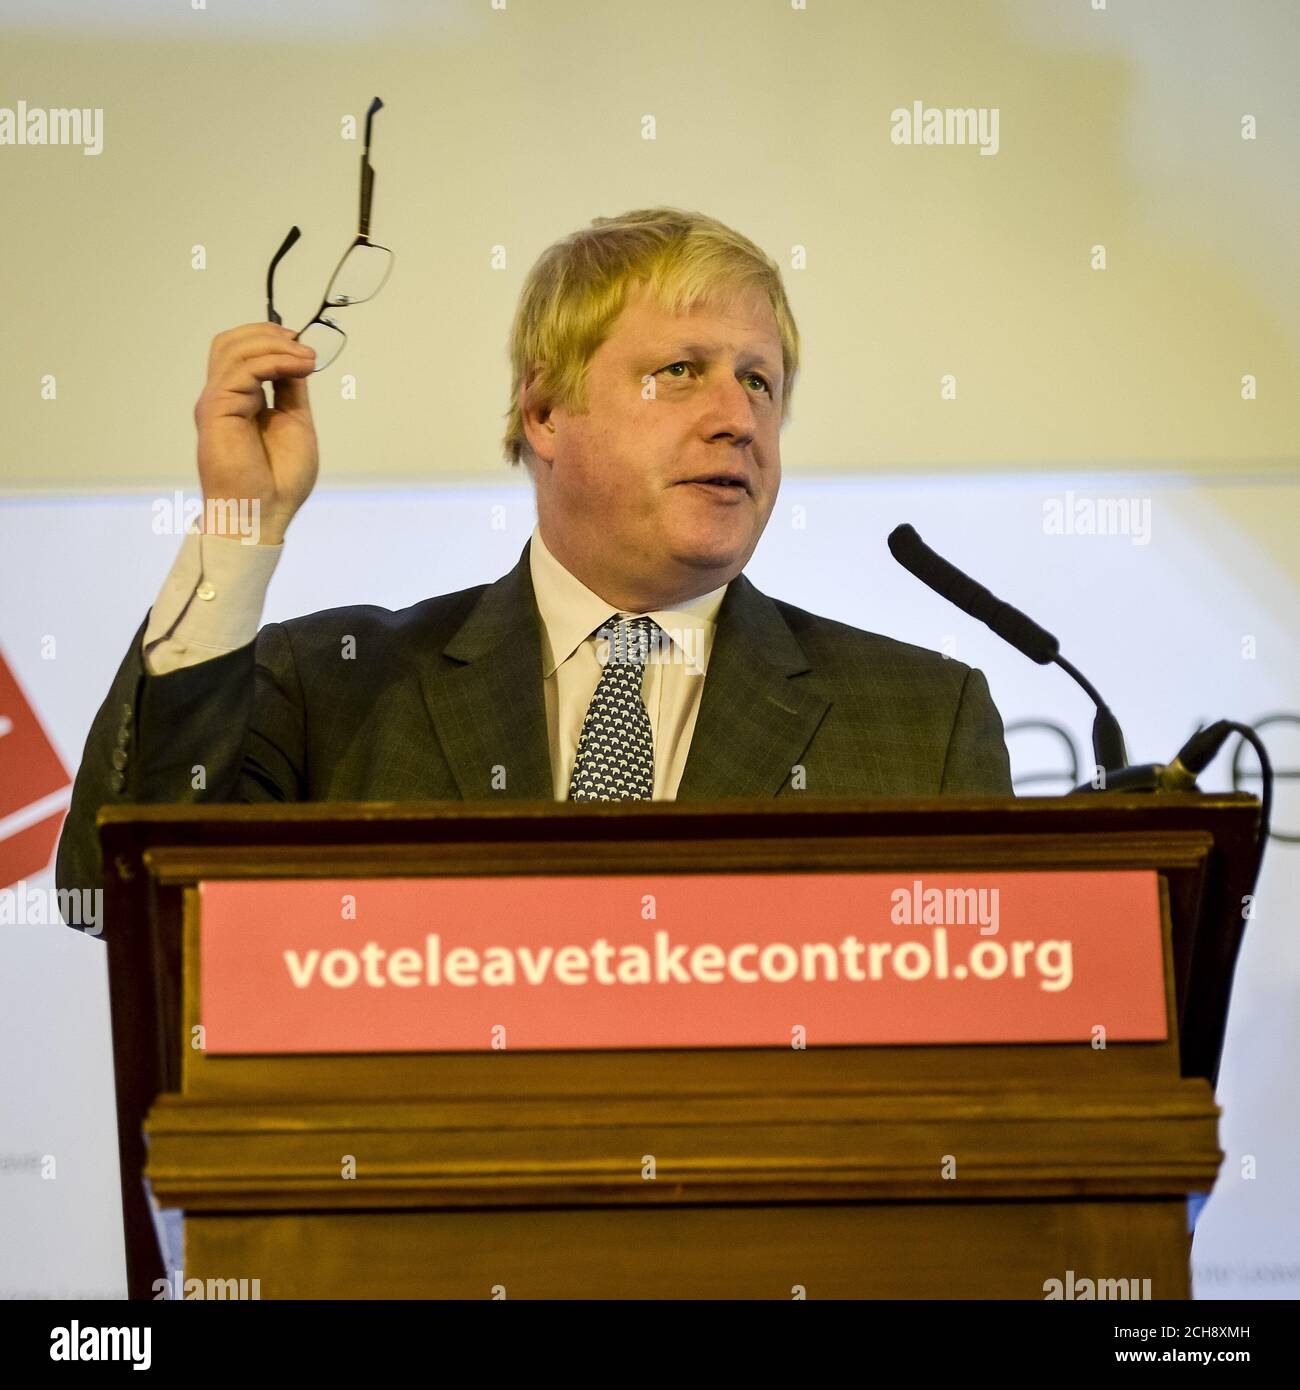 Boris Johnson MP, former Mayor of London and leading Vote Leave campaigner, speaks at Armada House in Bristol as he outlines a positive vision for Brexit. Stock Photo